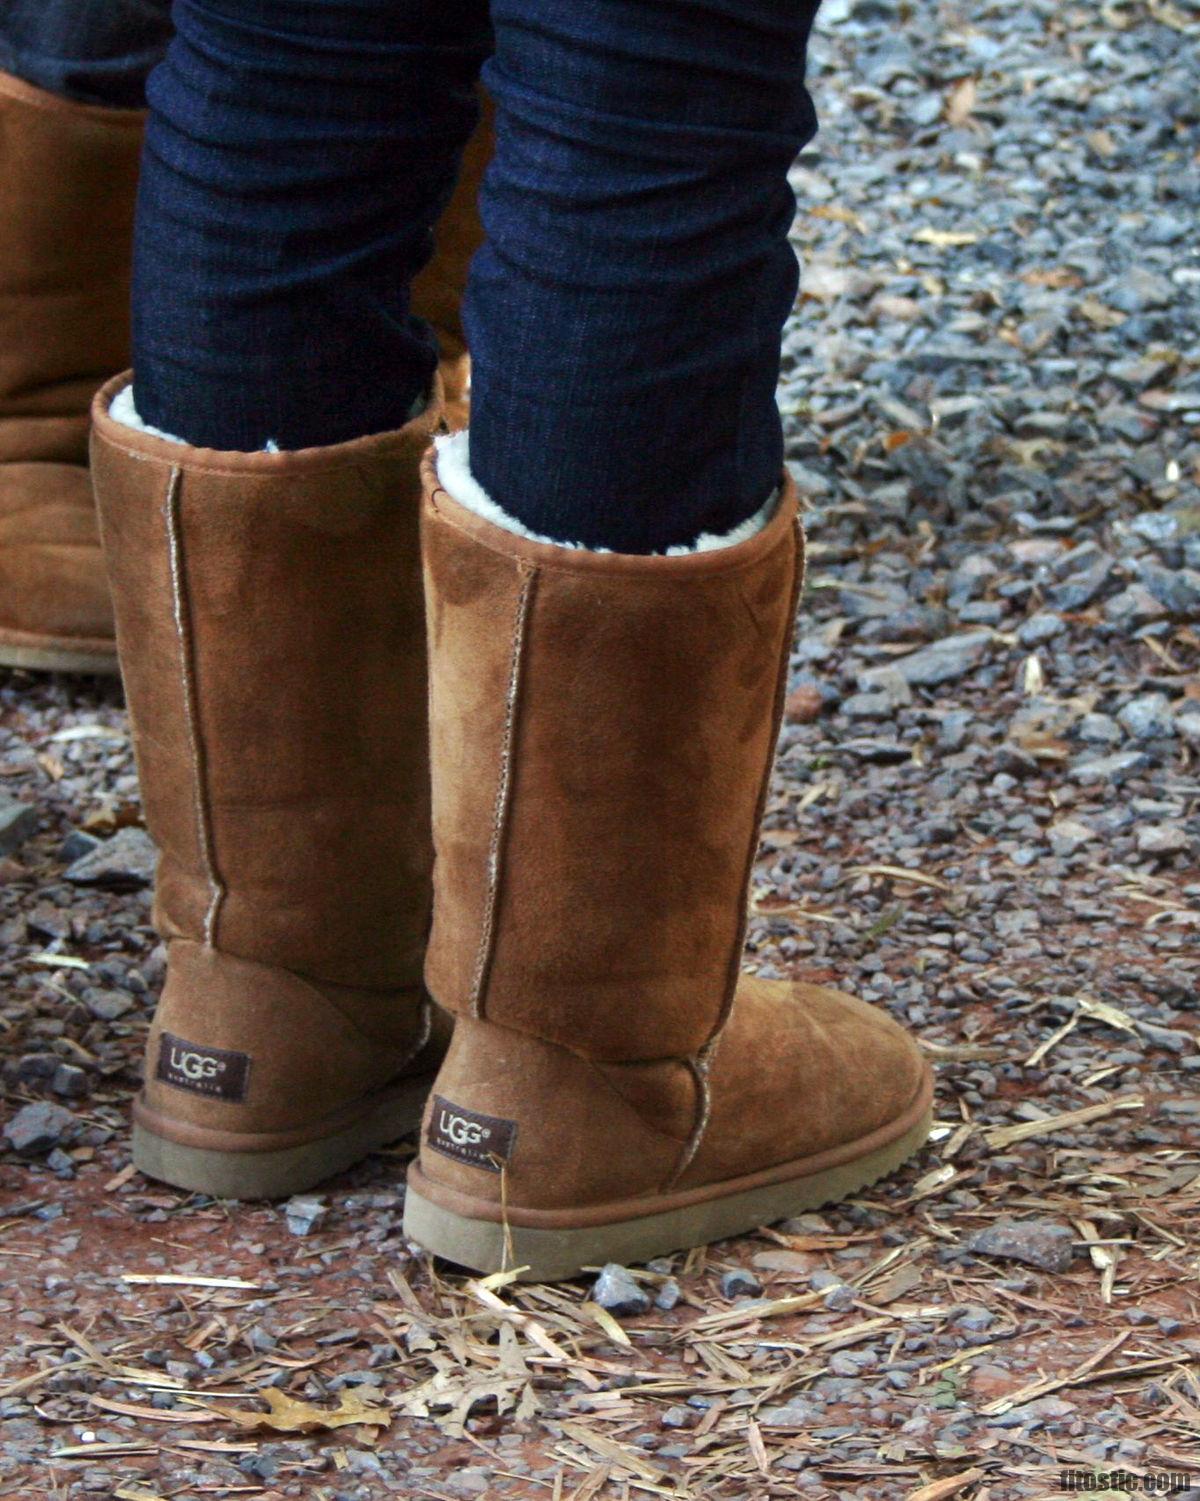 Pourquoi ugg s'appelle ugg ?